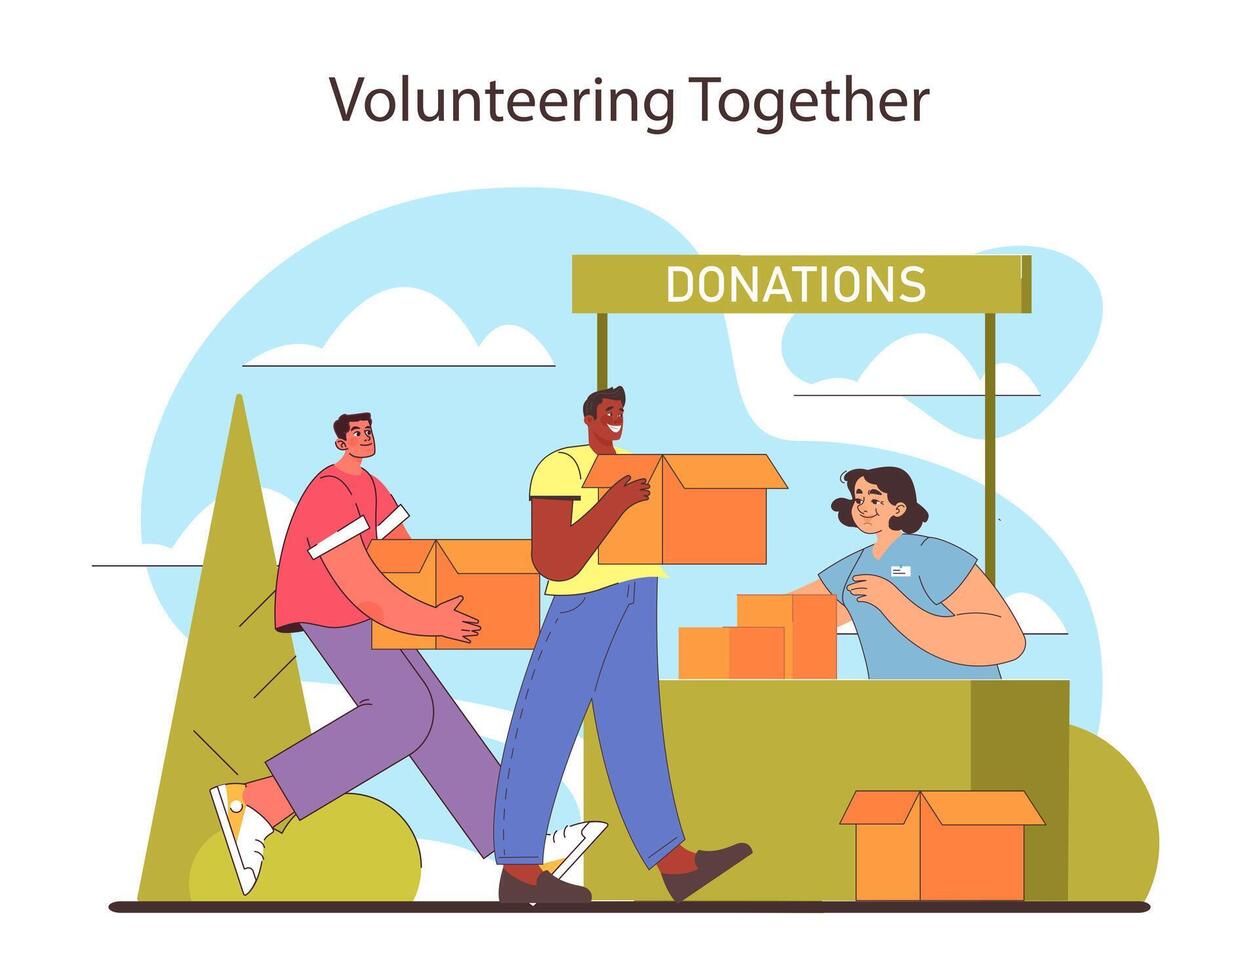 Volunteering Together concept. Companions contributing to the community by donating goods. vector